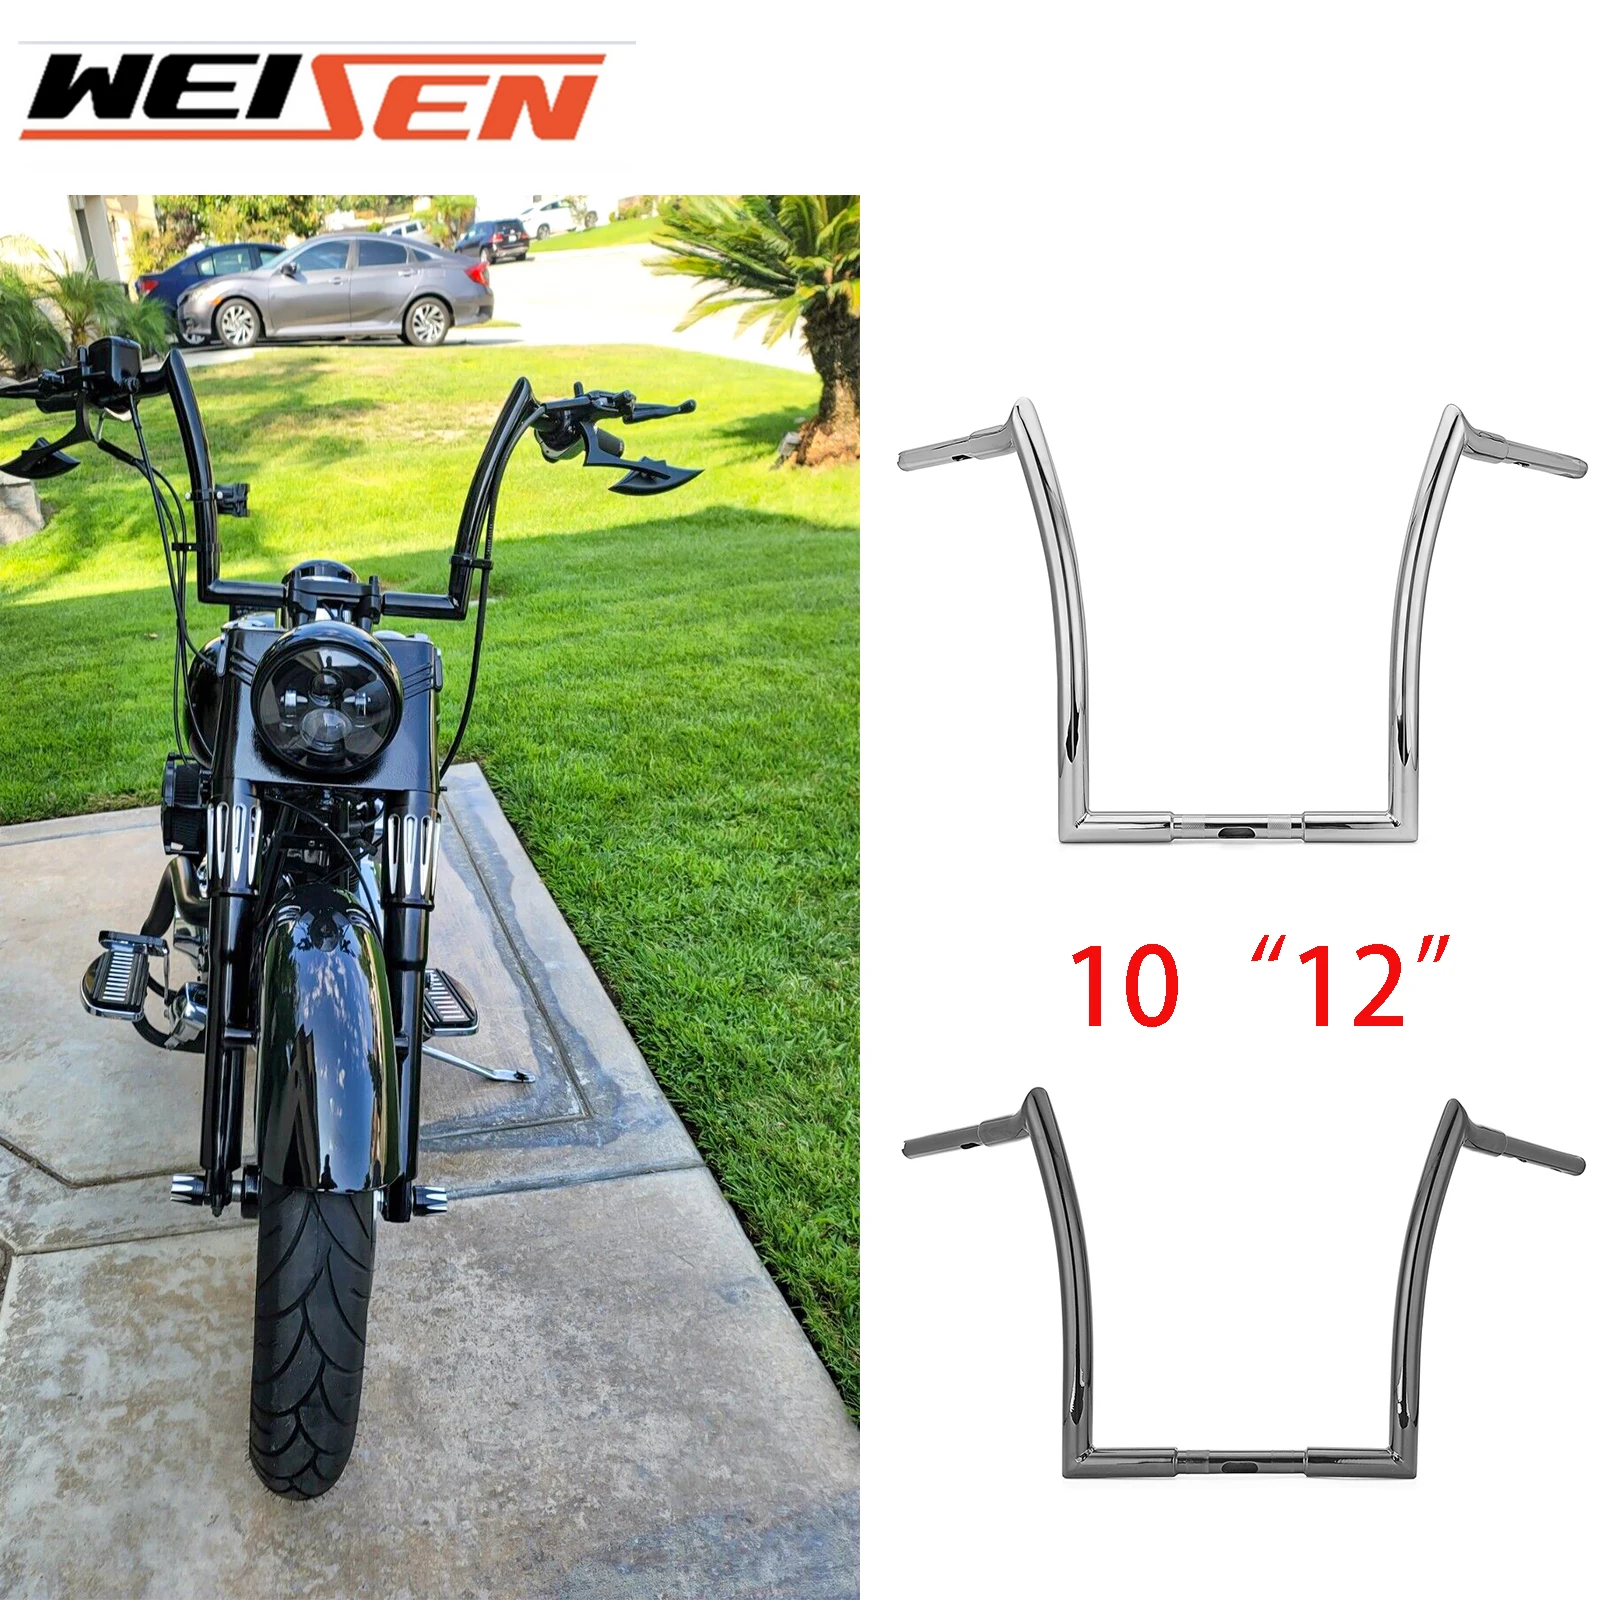 

Motorcycle 10" 12" Riser Height Ape Monkey Bar Handlebar Horn for Harley Sportster Softail Dyna Road Glide Road King Accessories